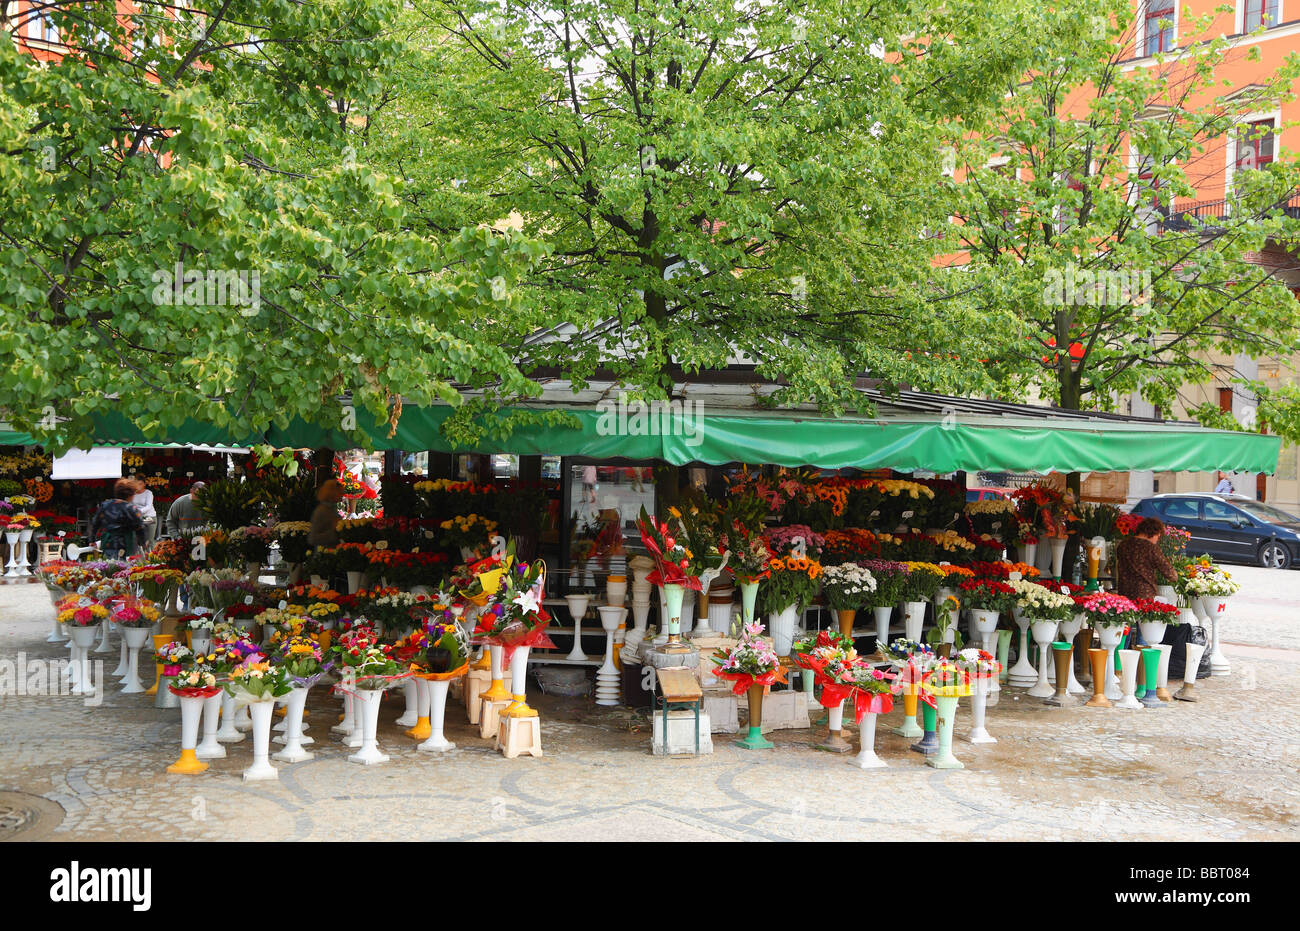 Flower stall Solny Square Wroclaw Pologne Banque D'Images